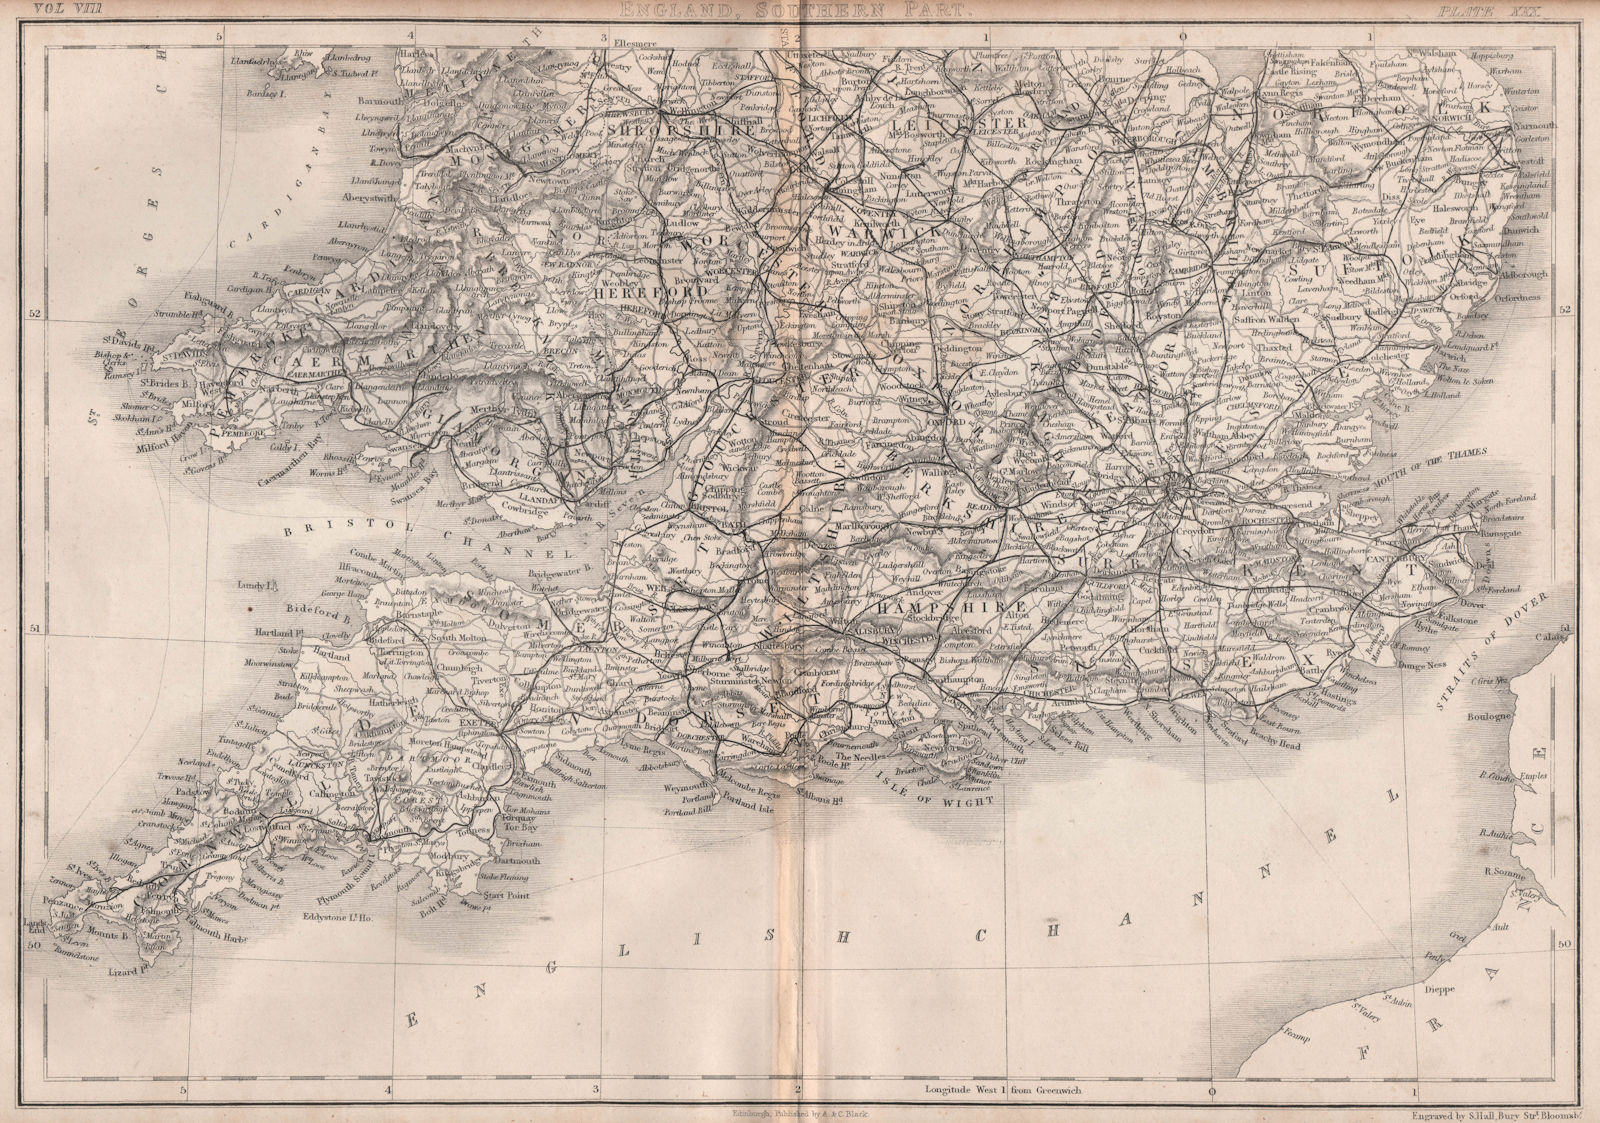 Associate Product Southern England and Wales showing railways. BRITANNICA 1860 old antique map